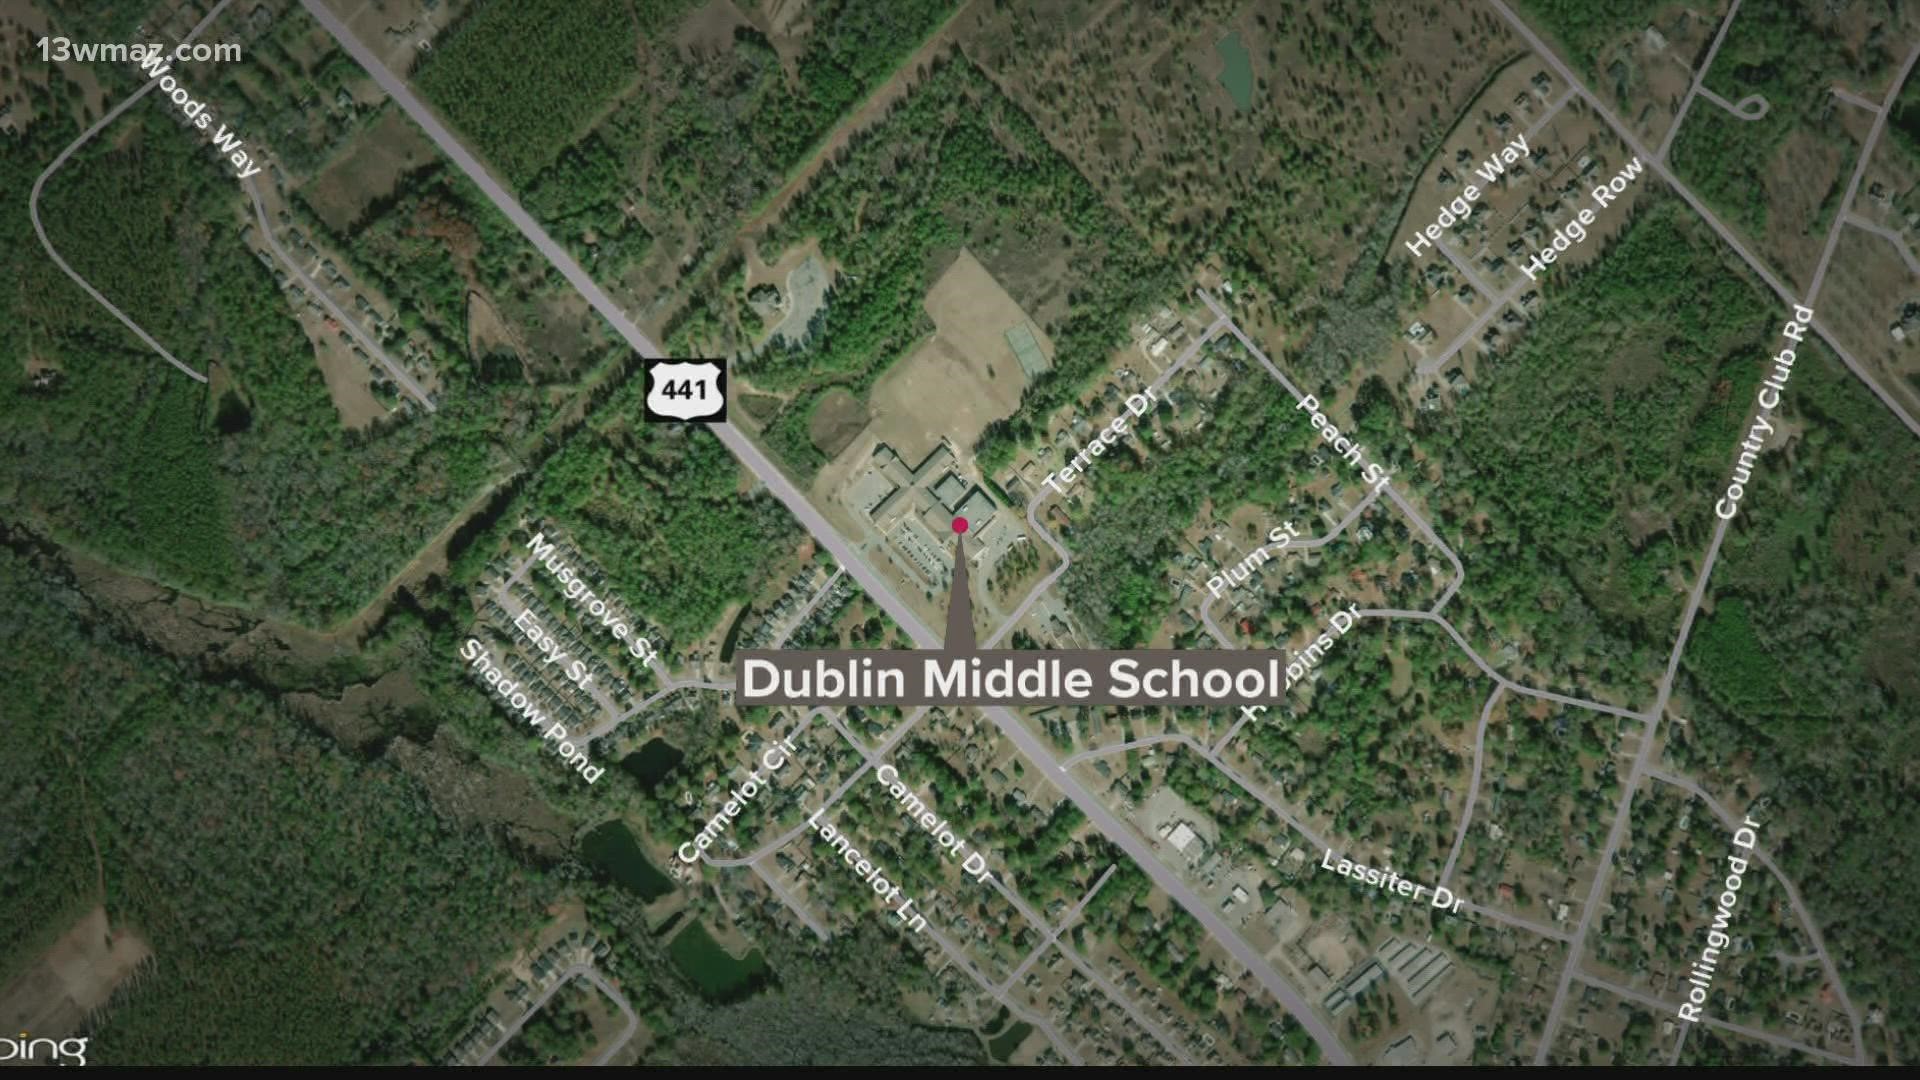 According to the district, it’s because the student allegedly brought a gun to school. They say the school resource officer recovered the weapon.